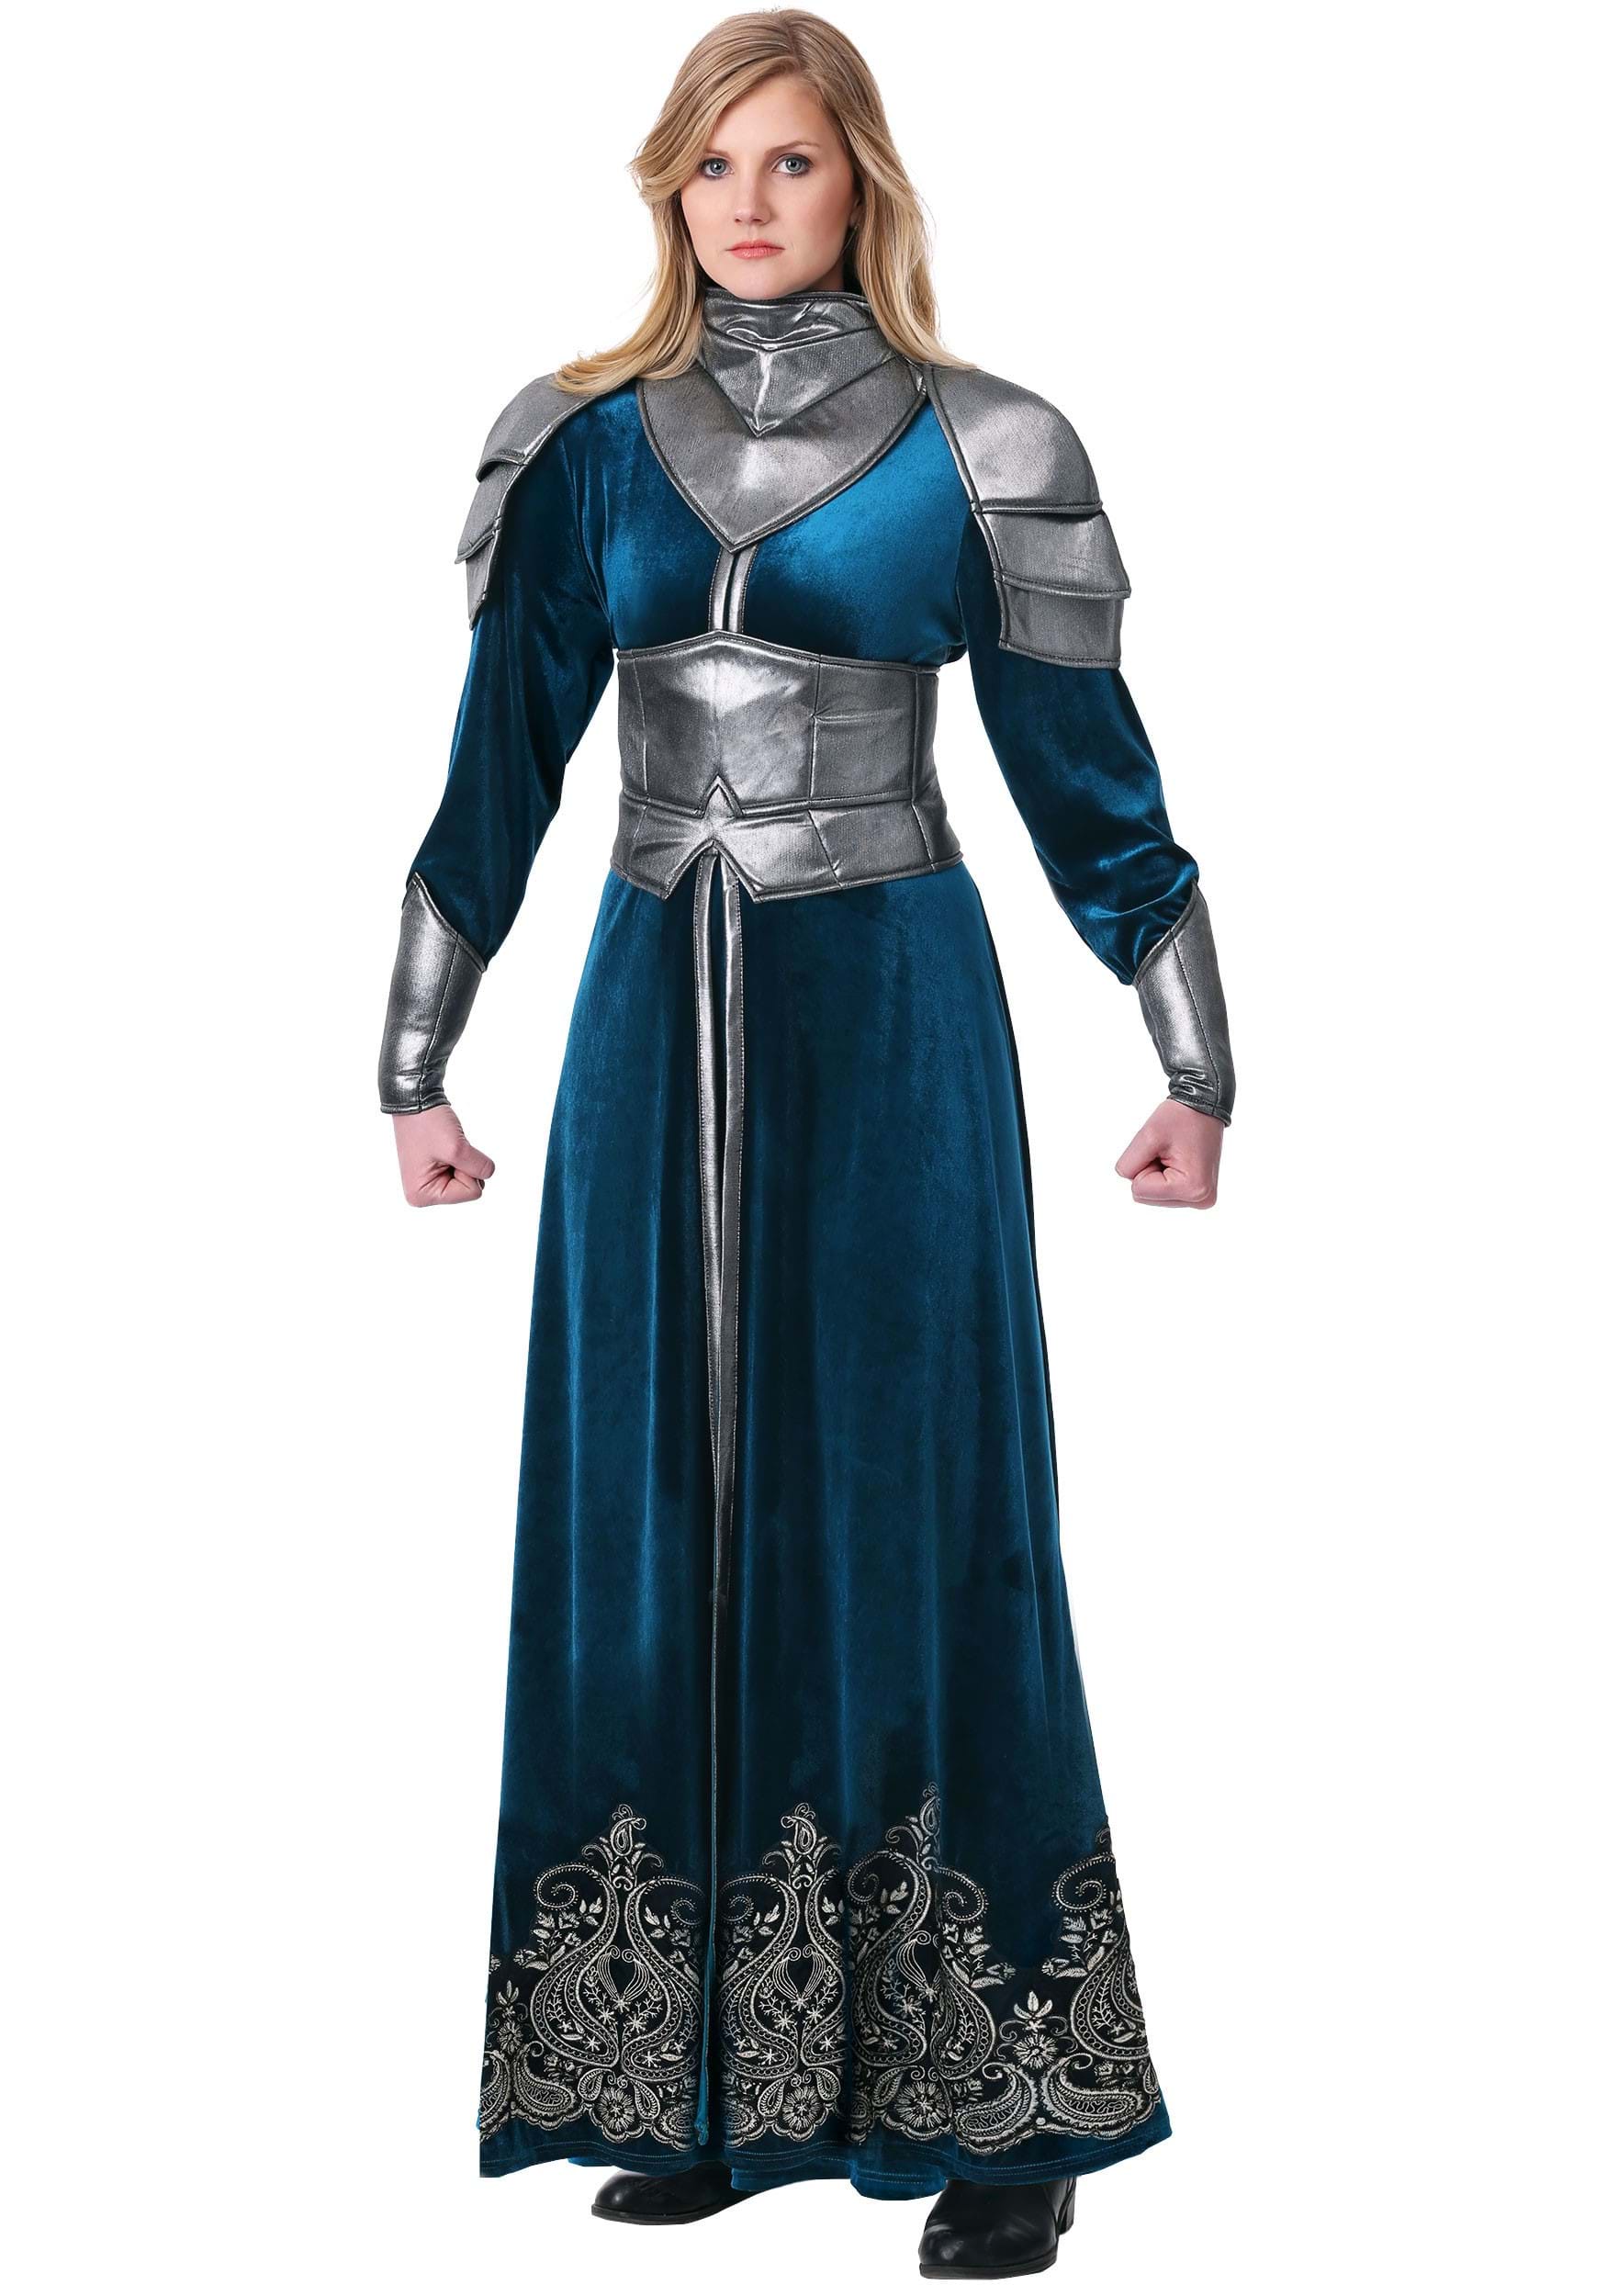 Image of Medieval Warrior Costume for Women ID FUN0409AD-XL